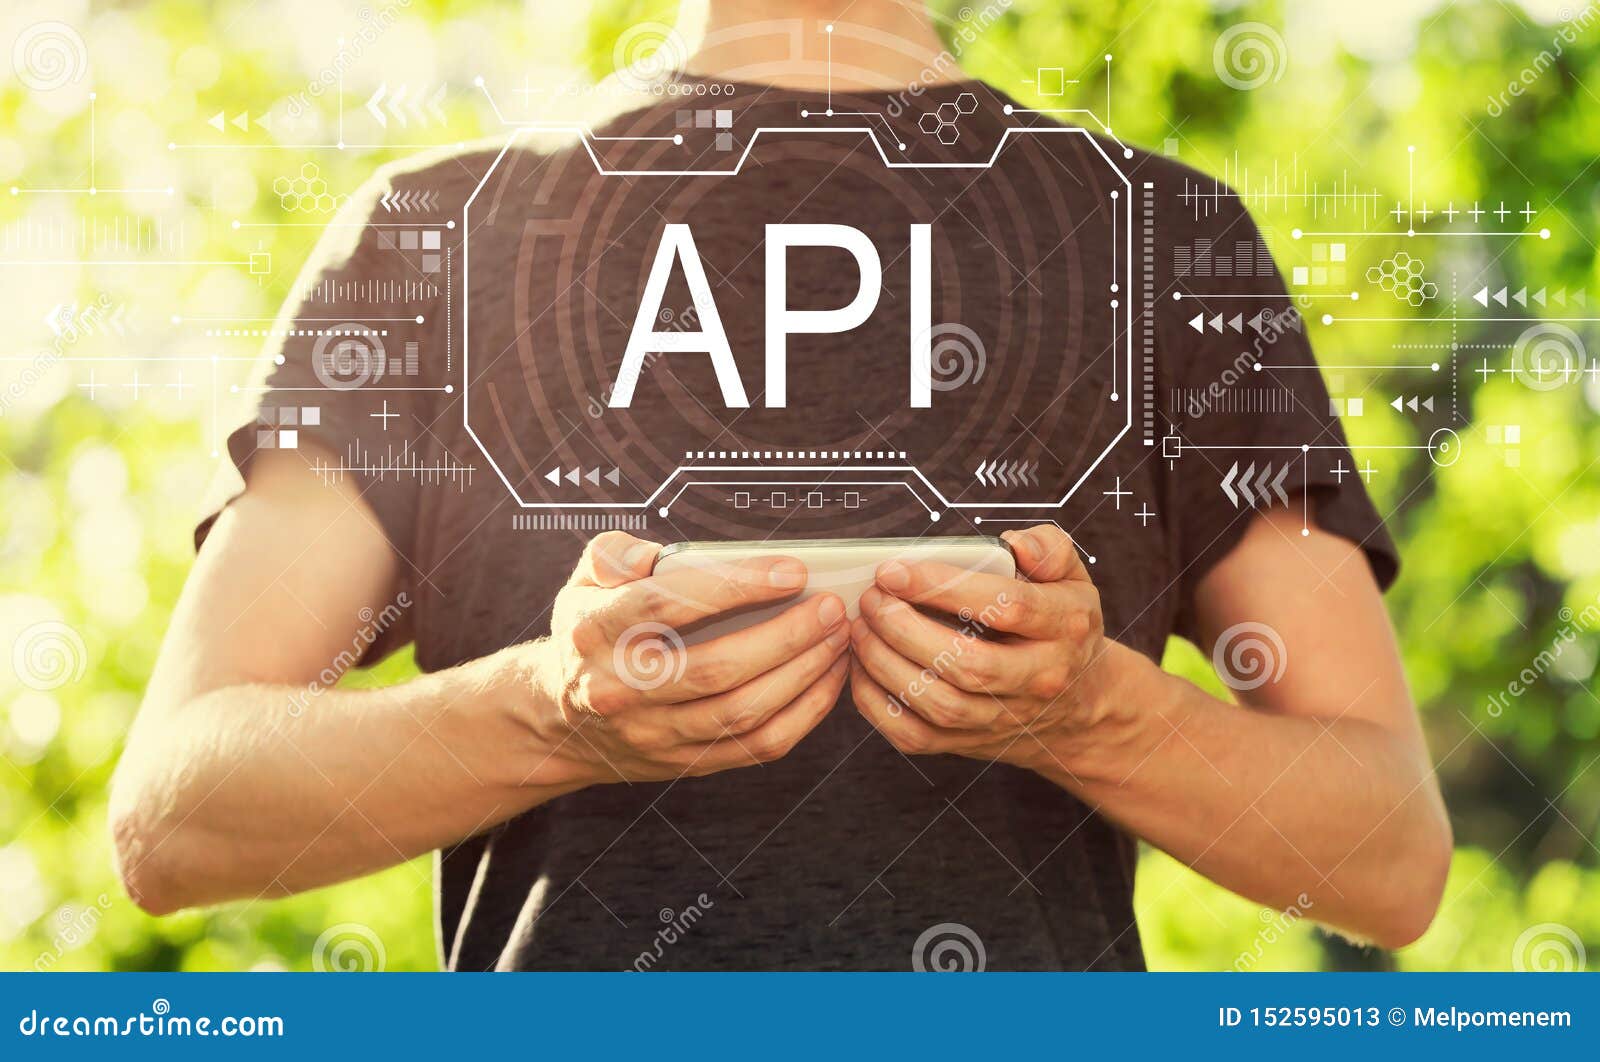 api concept with man holding his smartphone